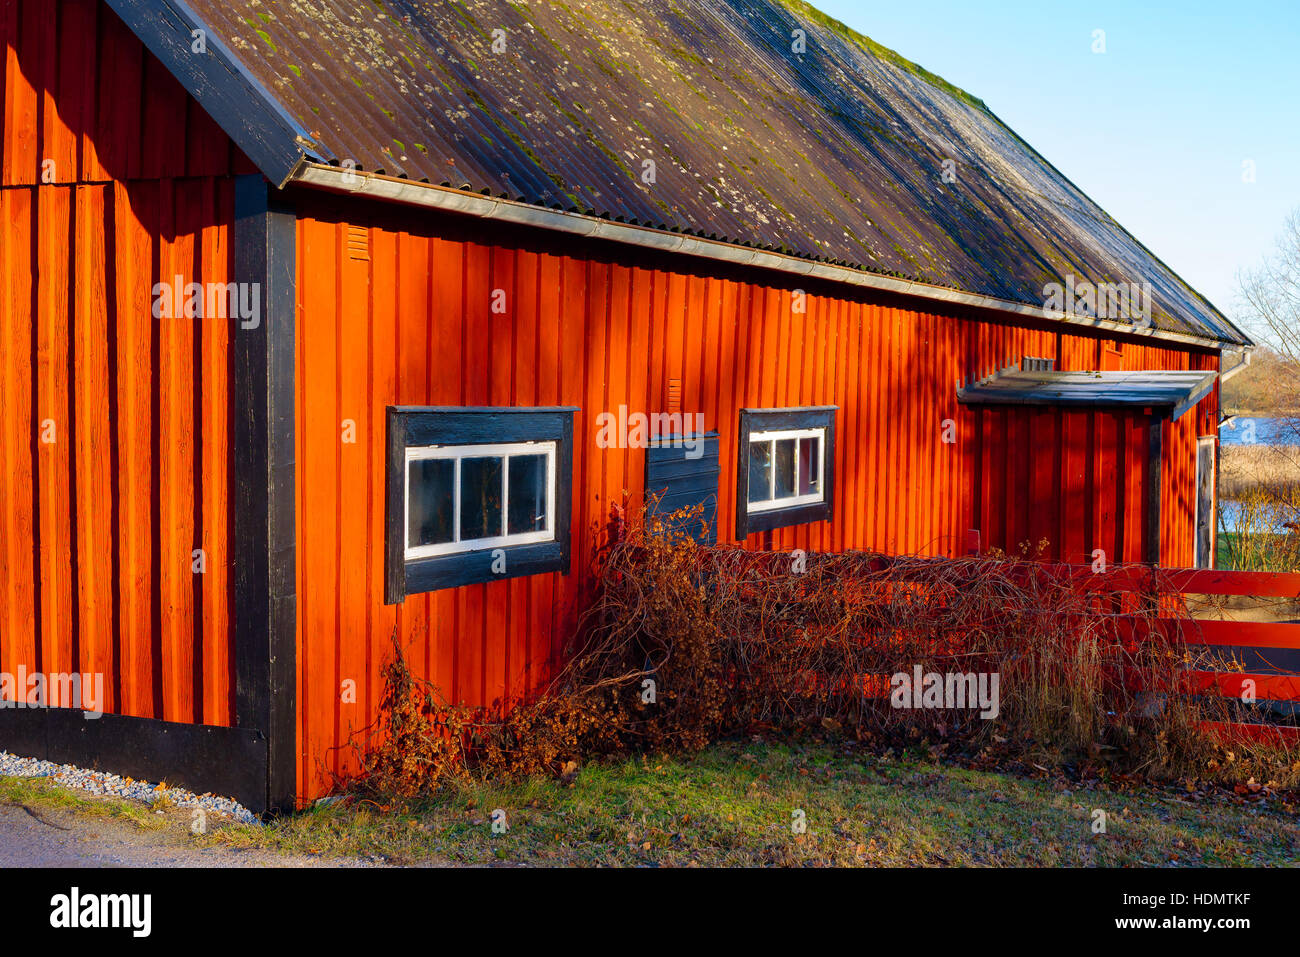 Bokenas, Sweden - December 12, 2016: Documentary of Swedish farm buildings. Intensely red barn with black corners, doors and window frames. Stock Photo